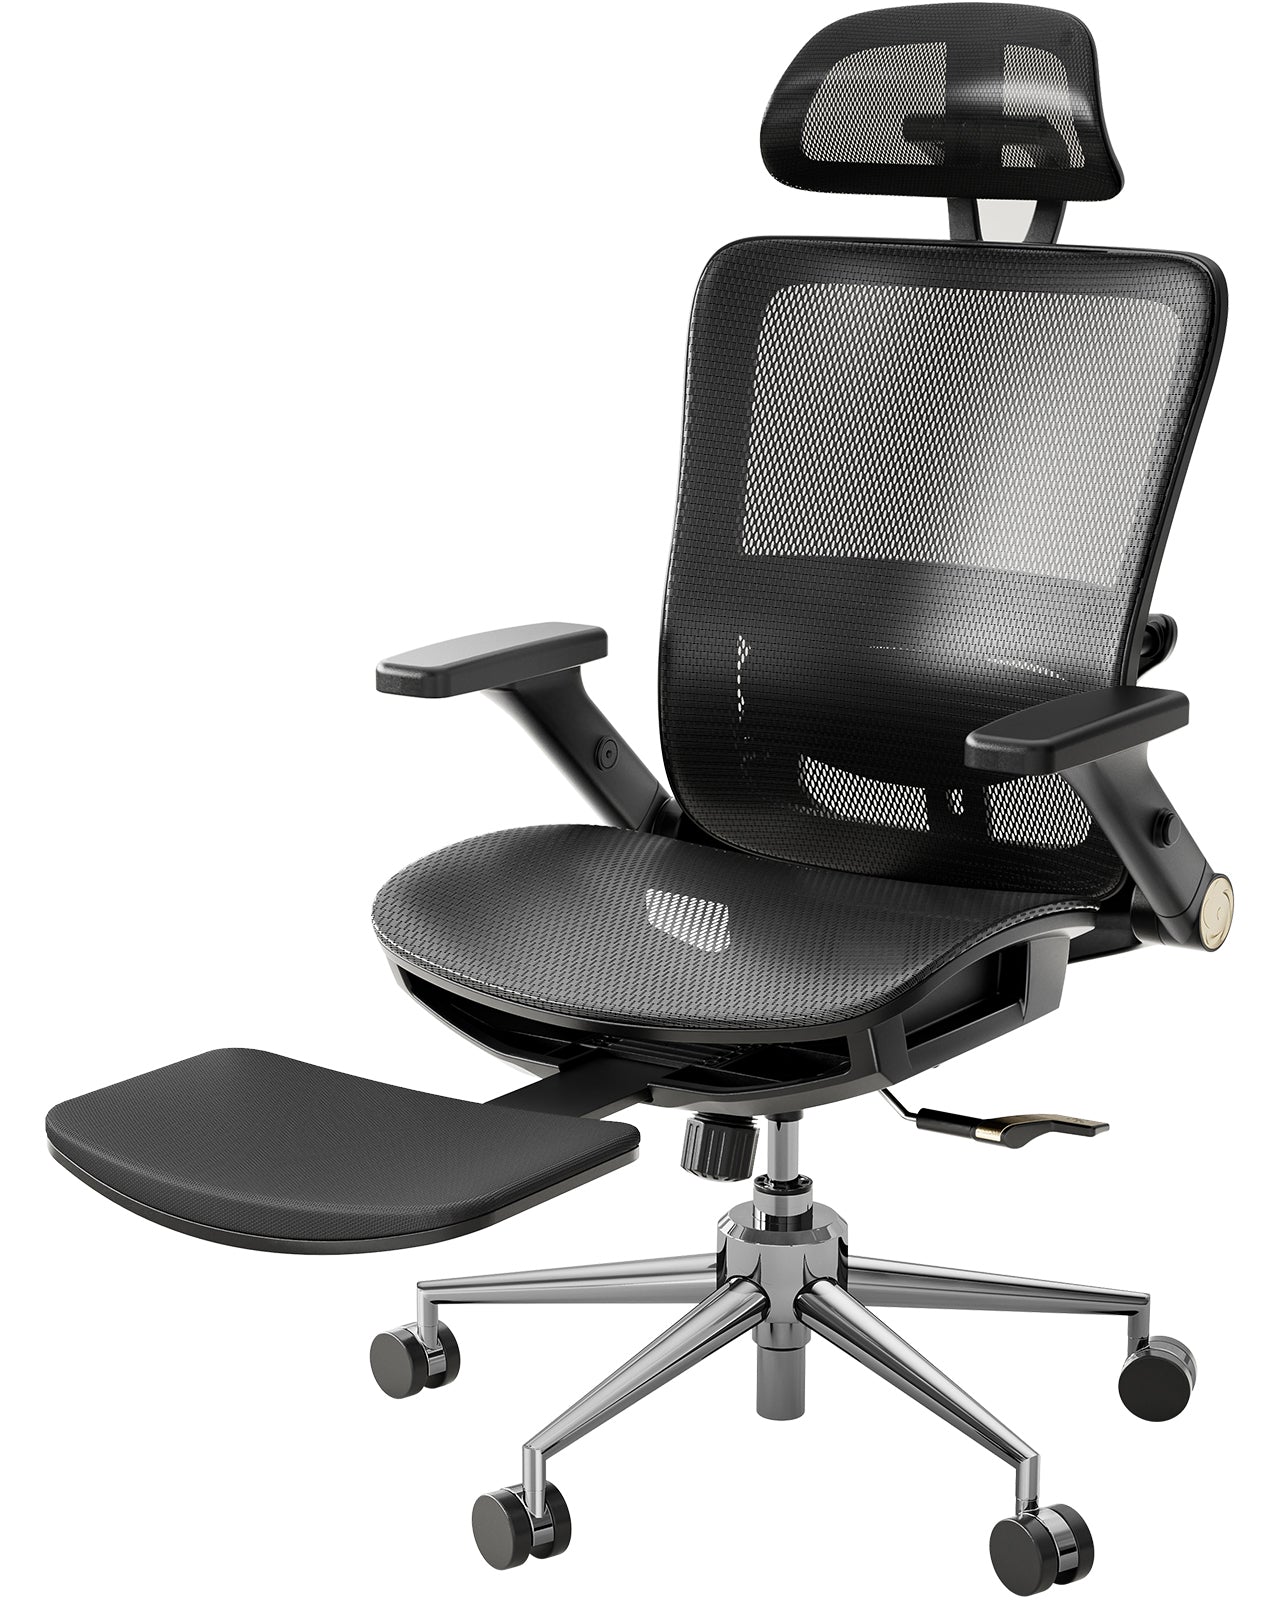 Ergonomic Office Chair With Foot Rest, Lumbar Support With Flip-Up